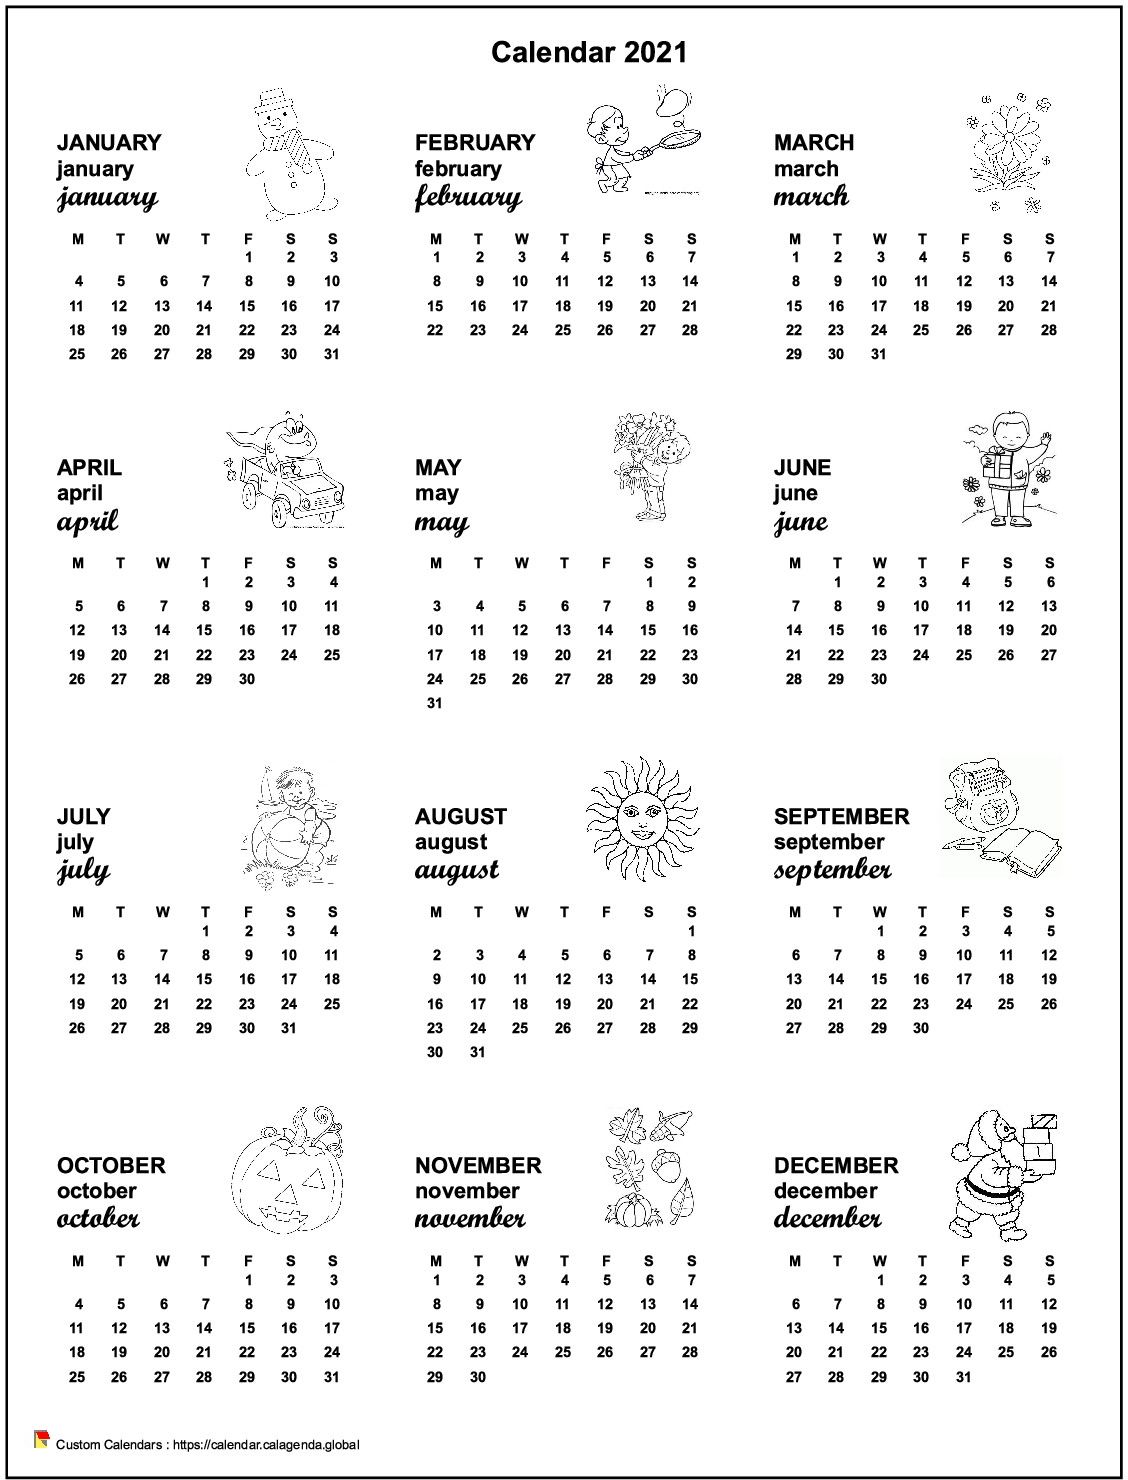 Calendar 2041 annual maternal and primary school